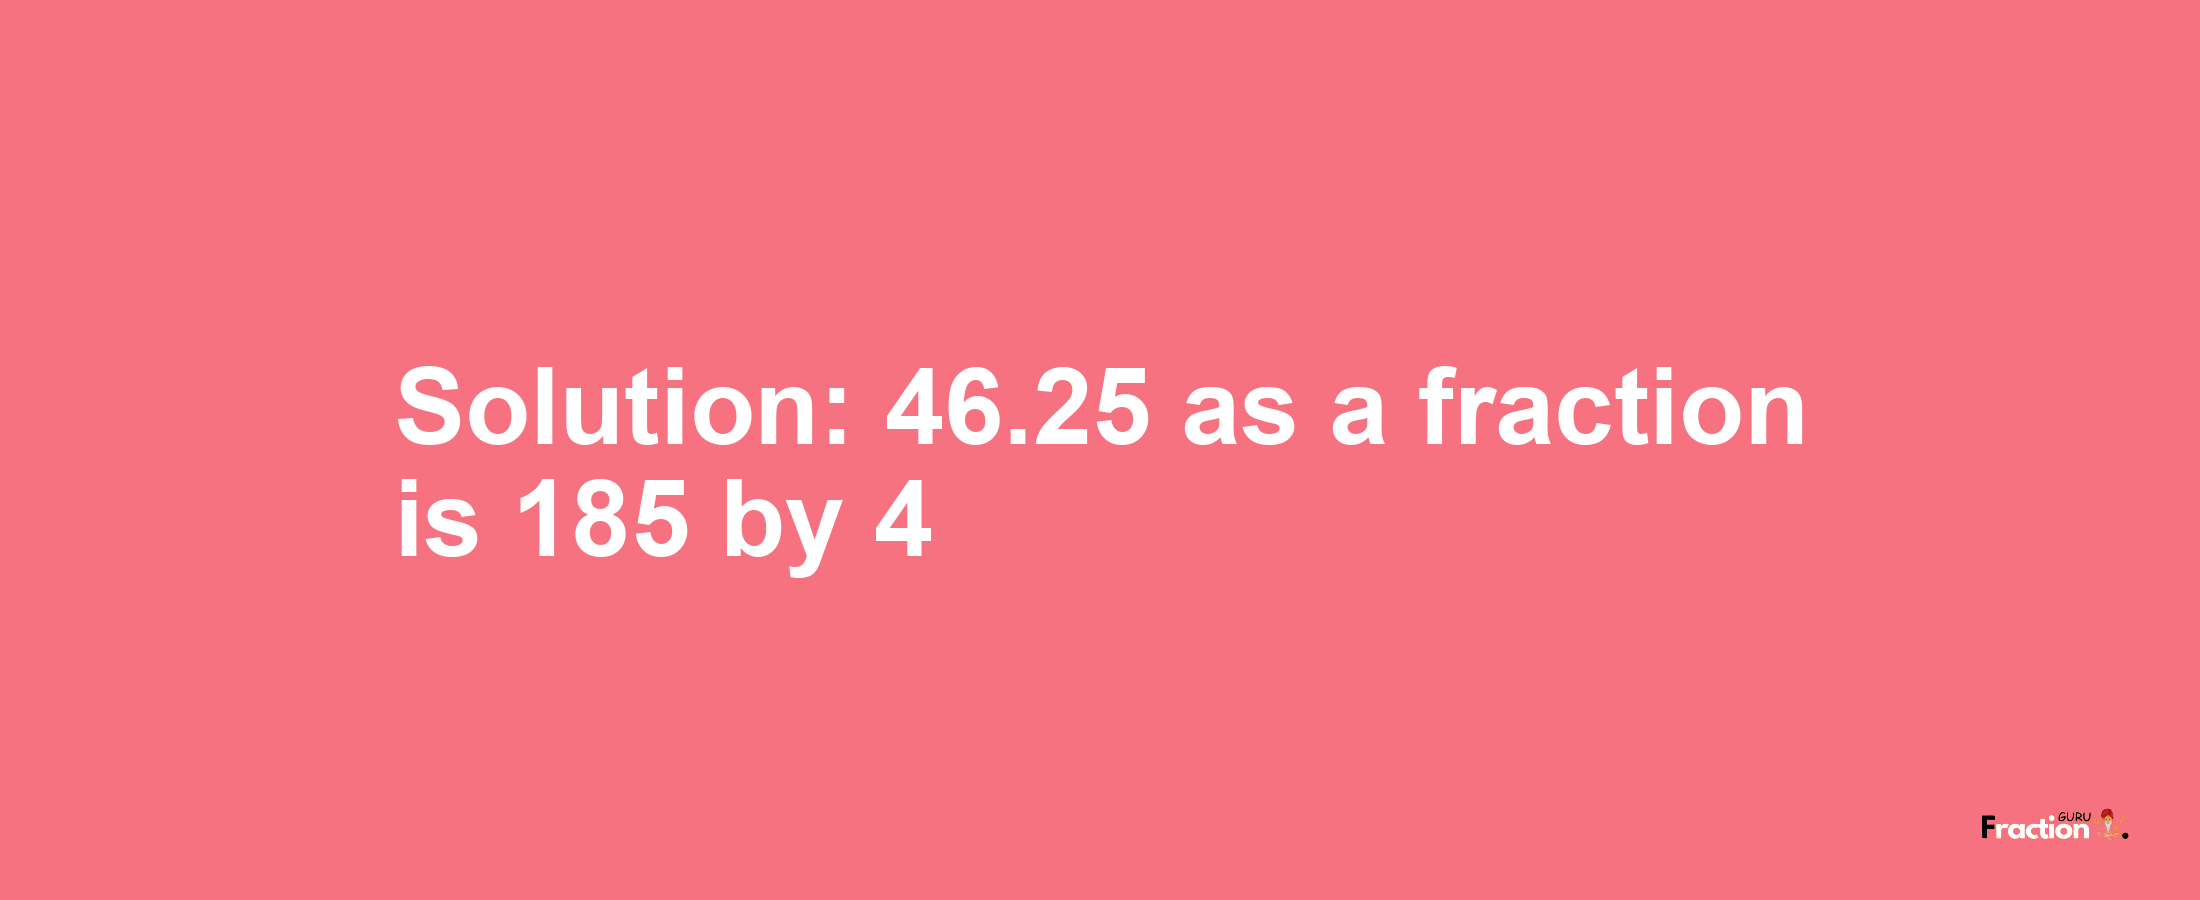 Solution:46.25 as a fraction is 185/4